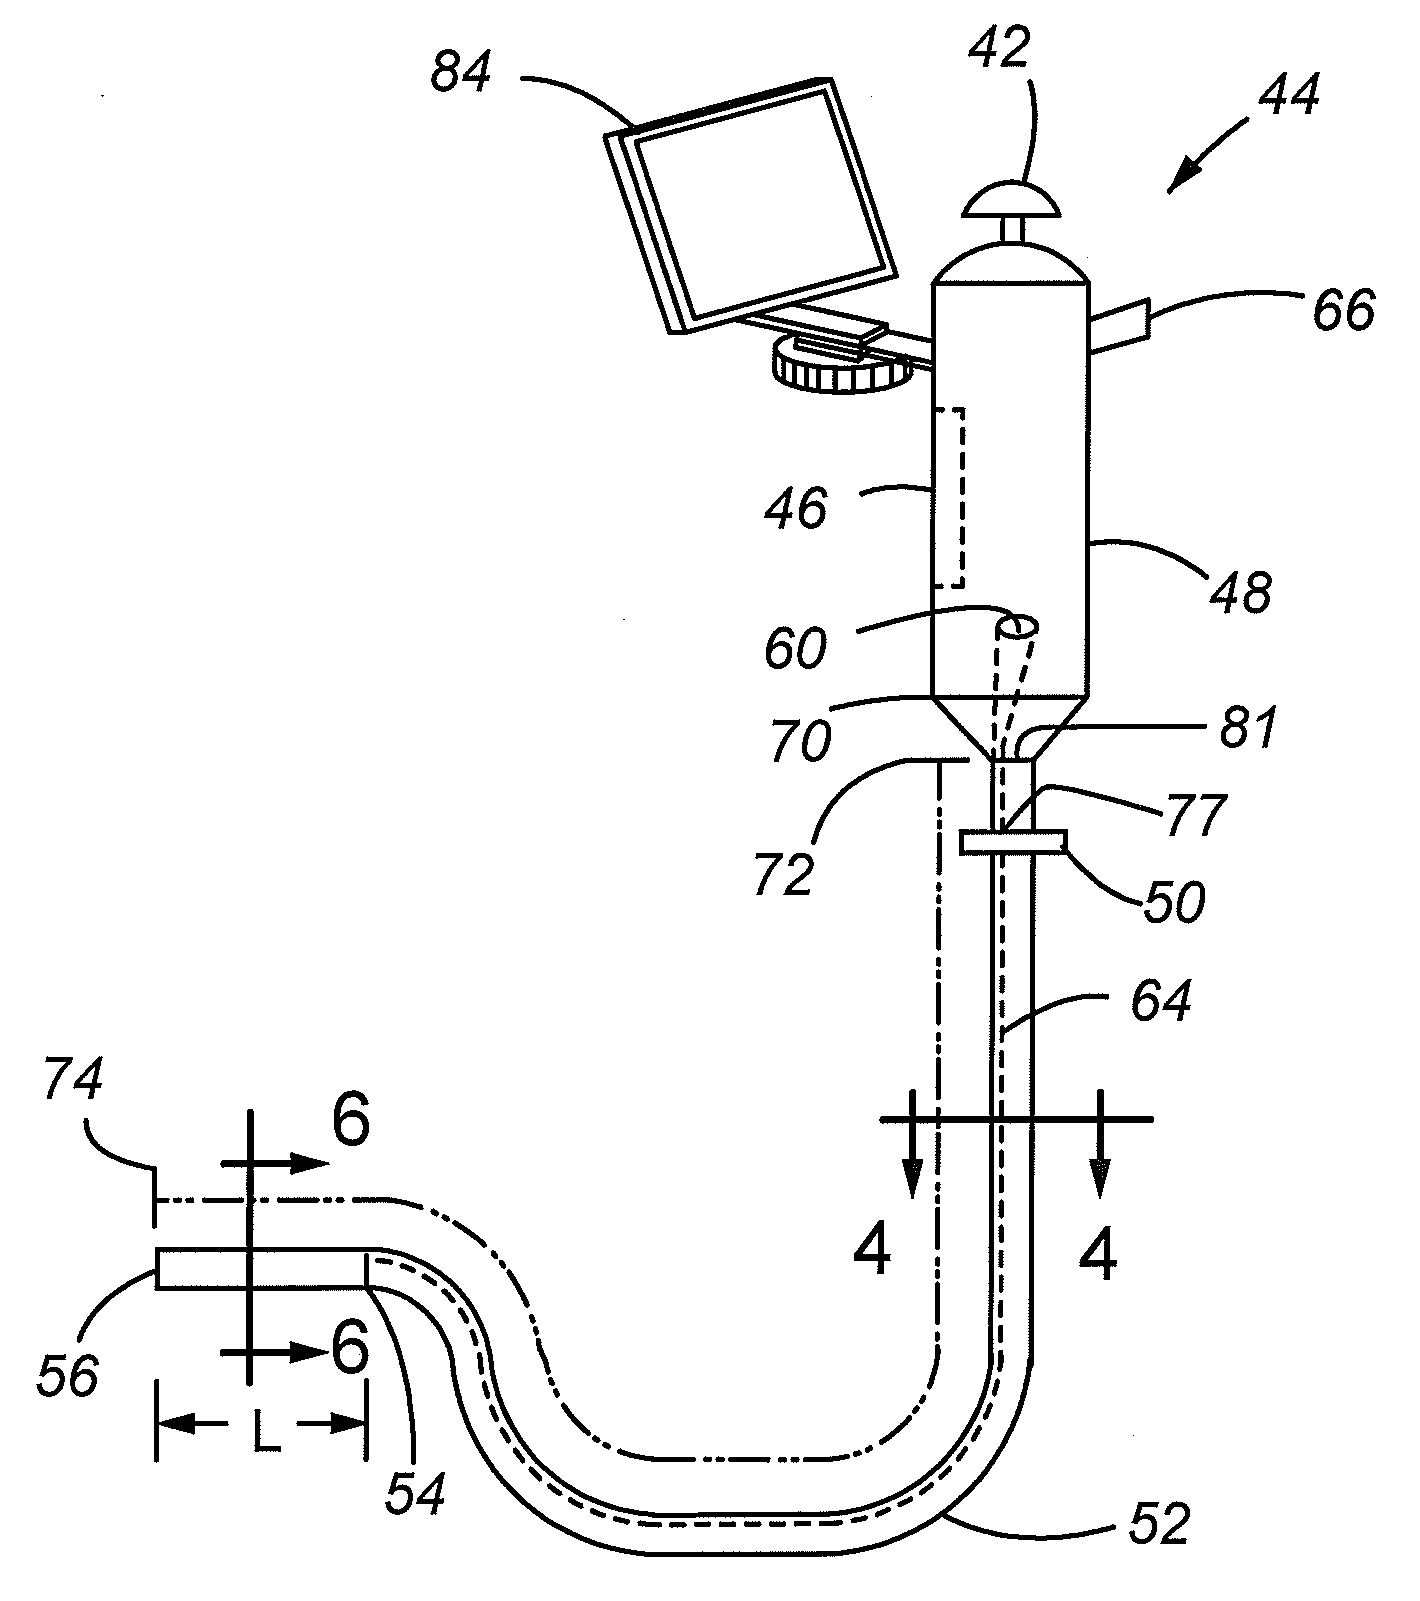 Wireless video stylet with display mounted to laryngoscope blade and method for using the same